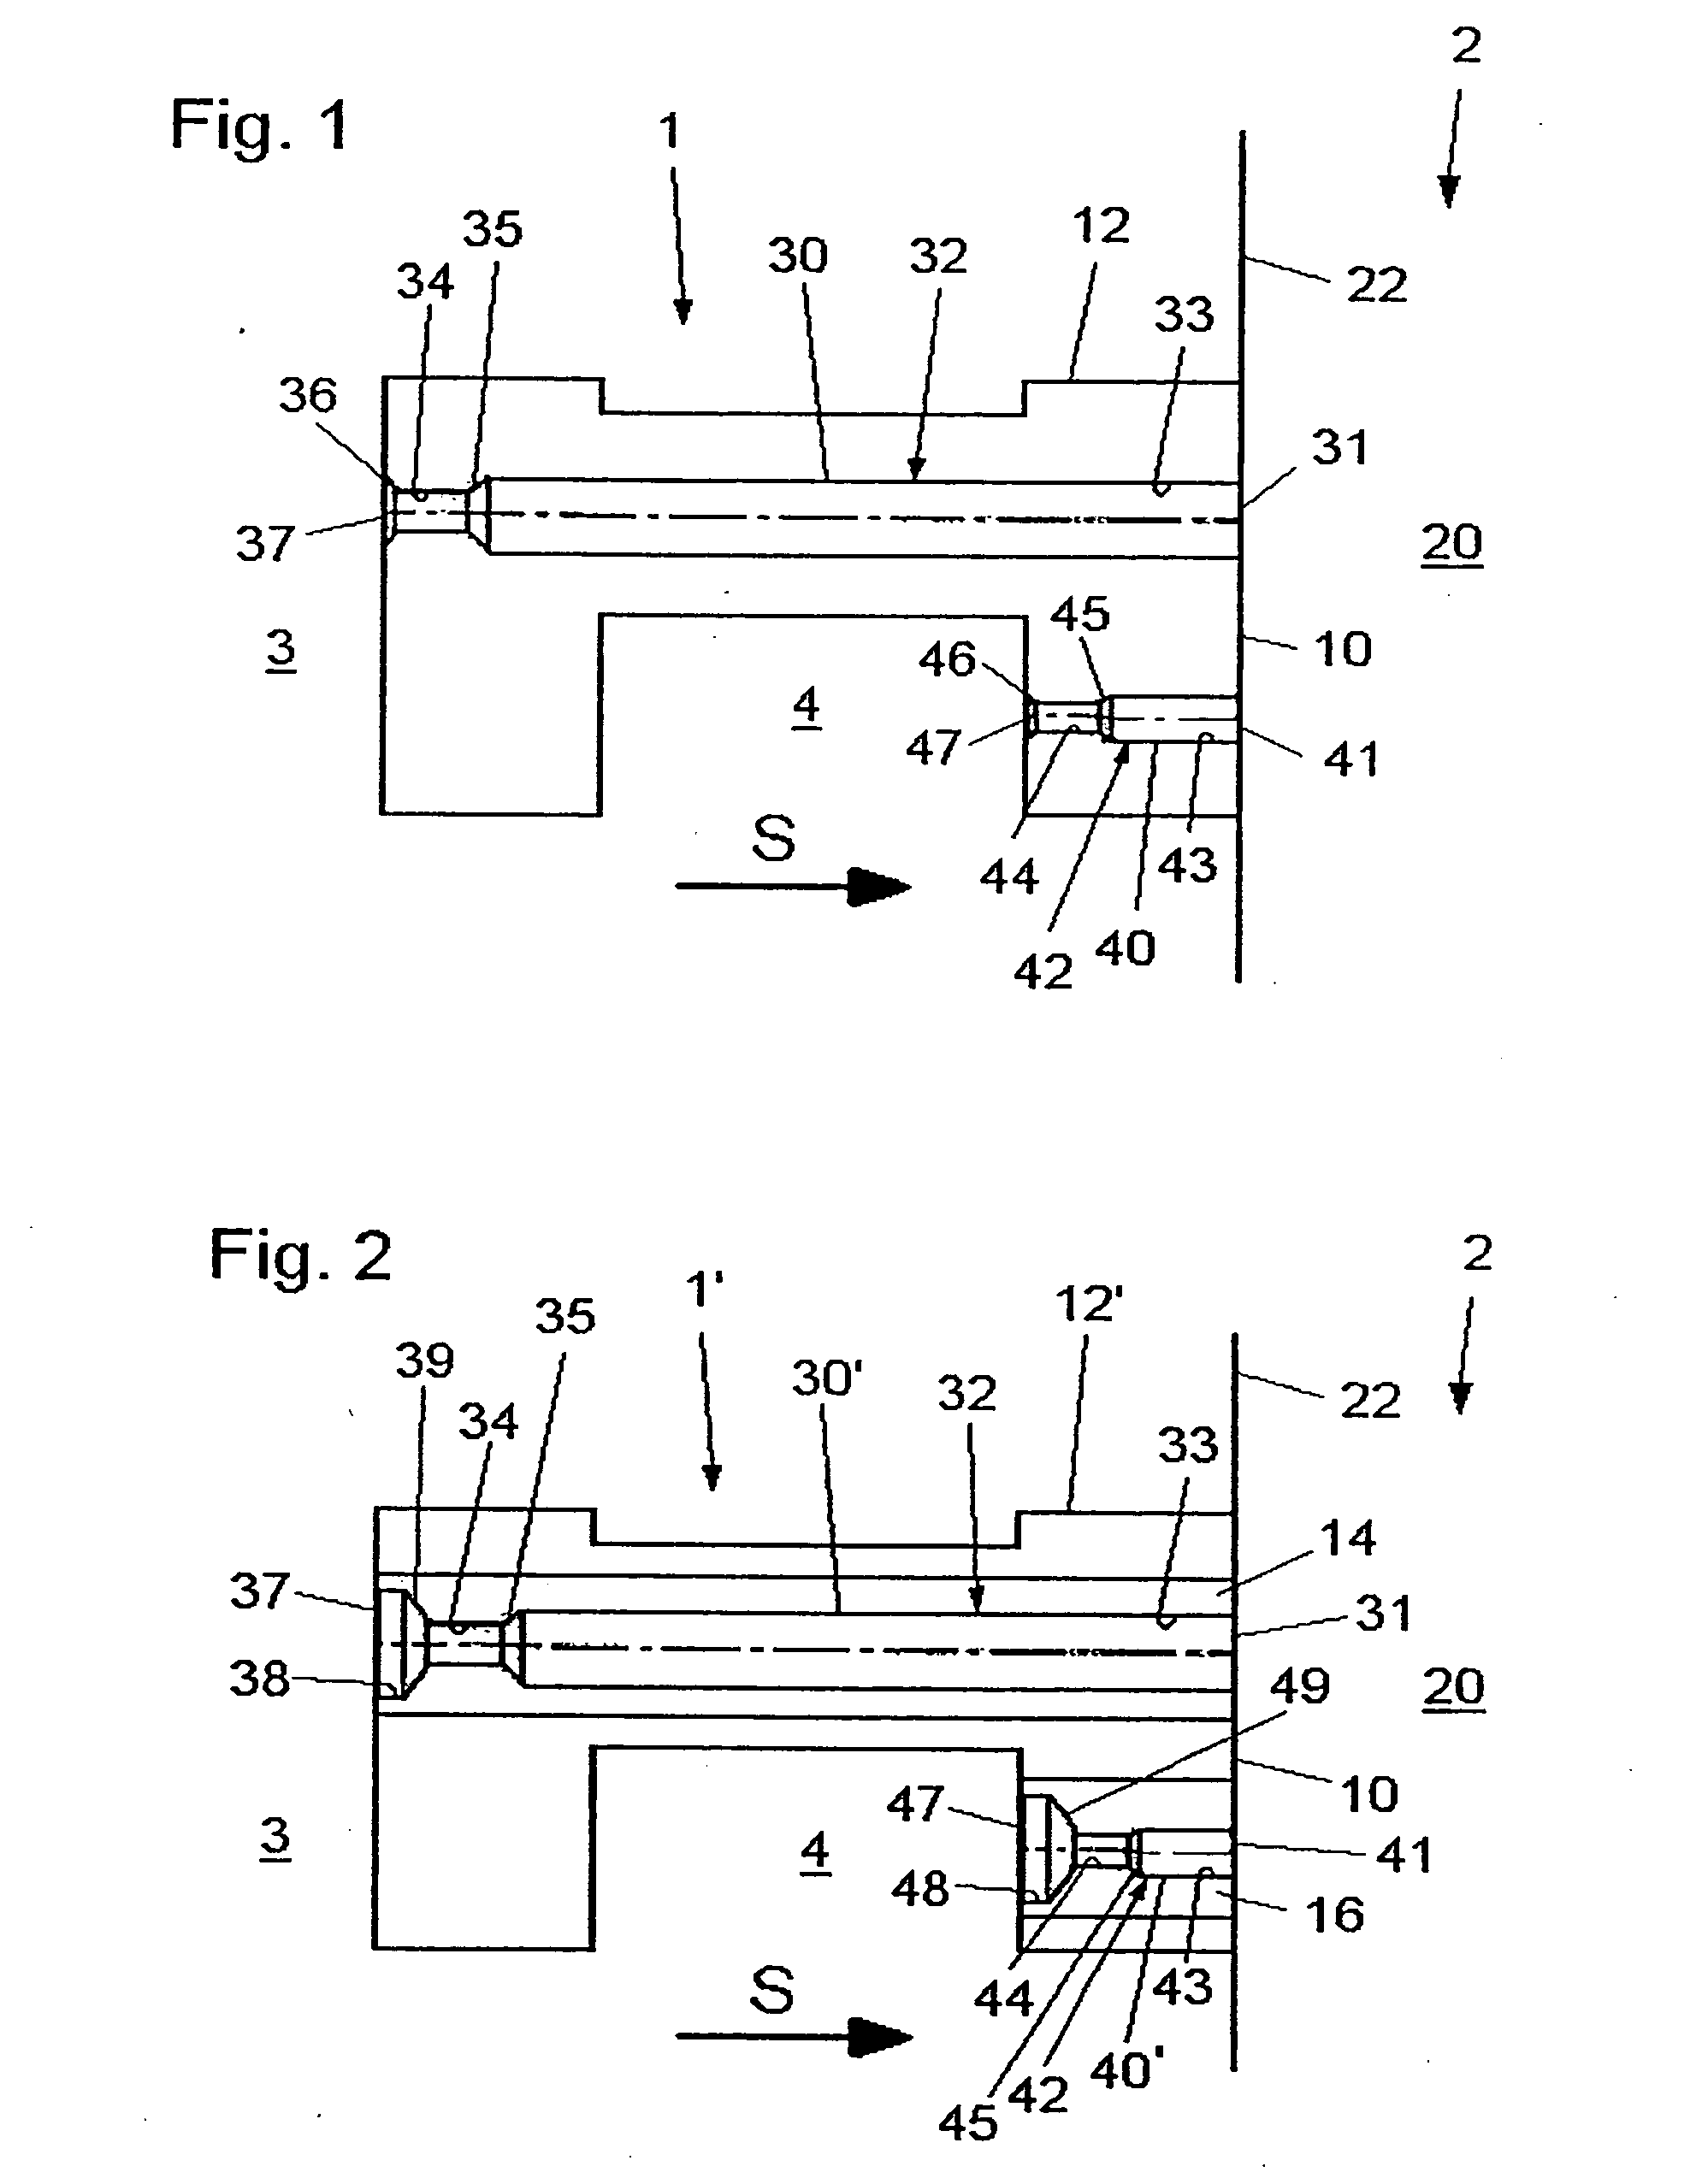 Injection device for combustion chambers of liquid-fueled rocket engines